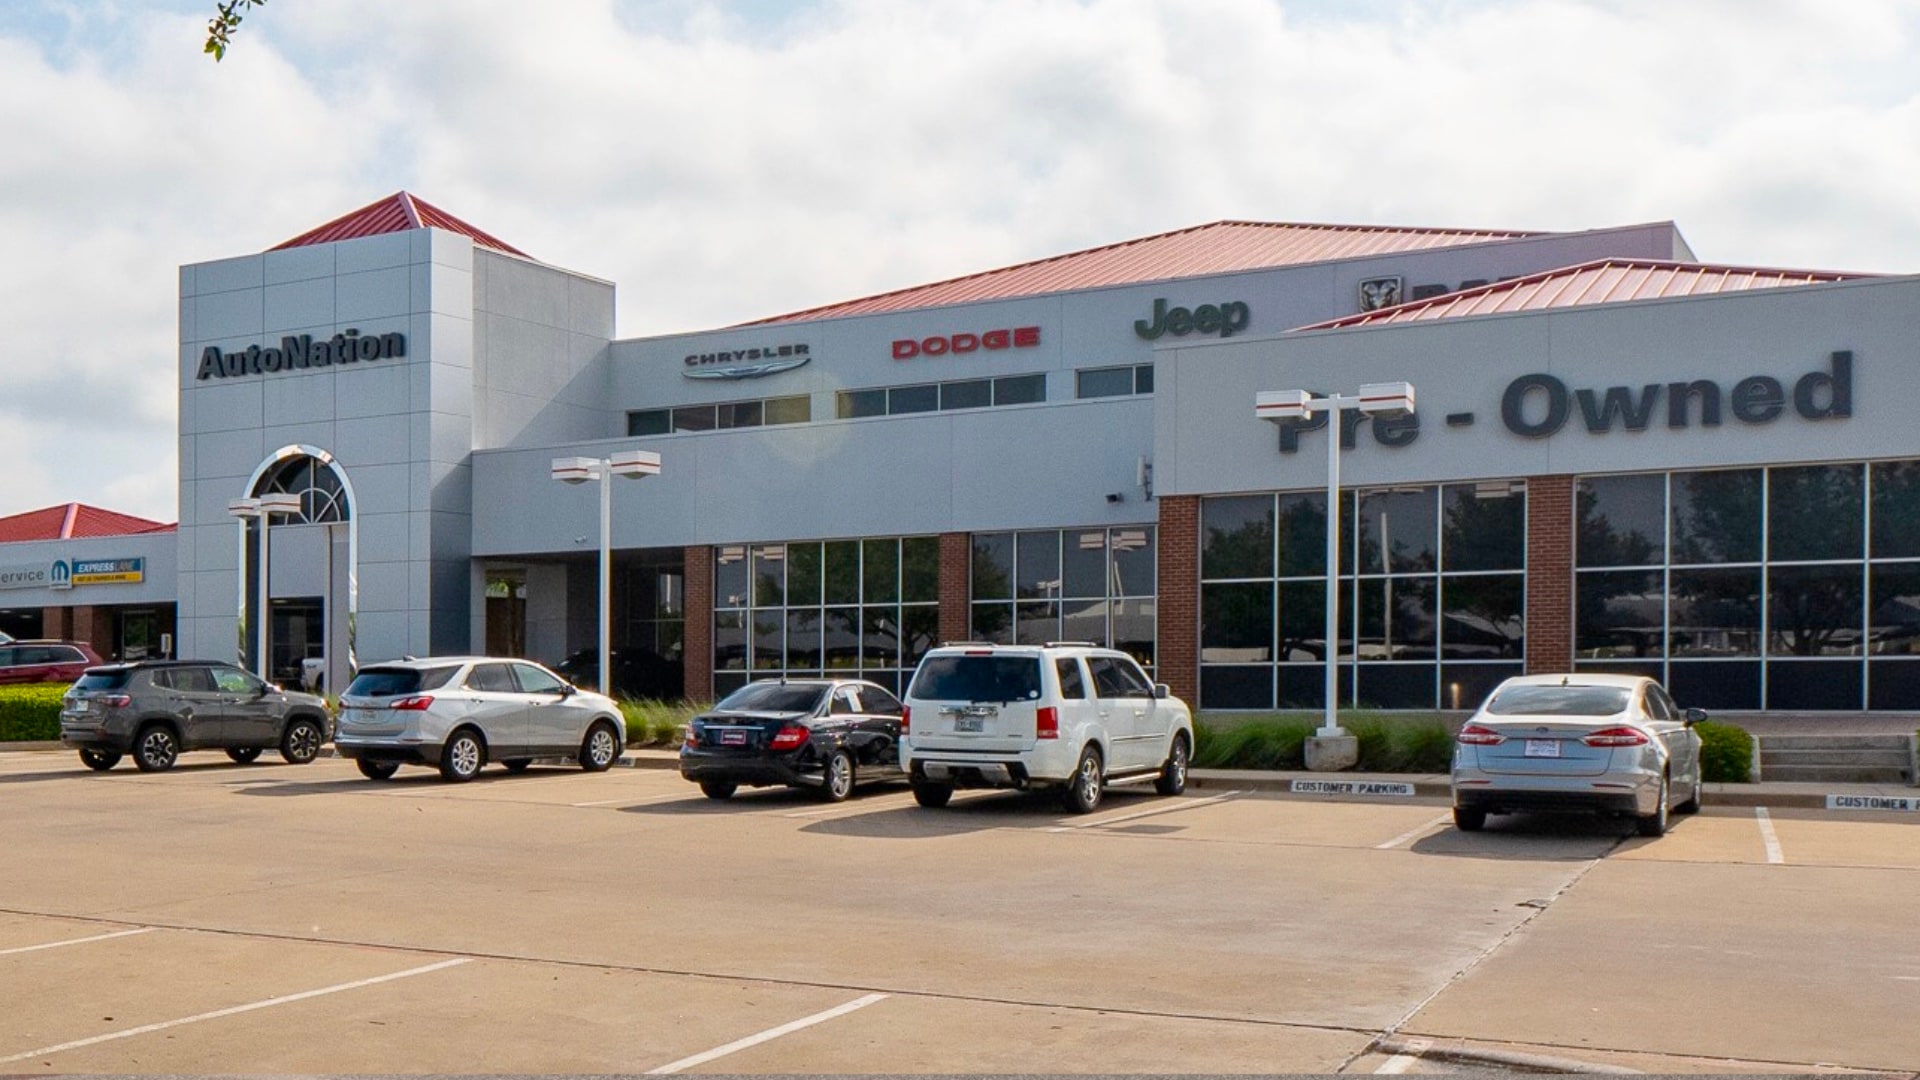 Exterior view of AutoNation Chrysler Dodge Jeep Ram North Fort Worth during the day. There is a cloudy sky and many vehicles parked near the grey and brick faced building. Trees and greenery are visible around the parking lot.